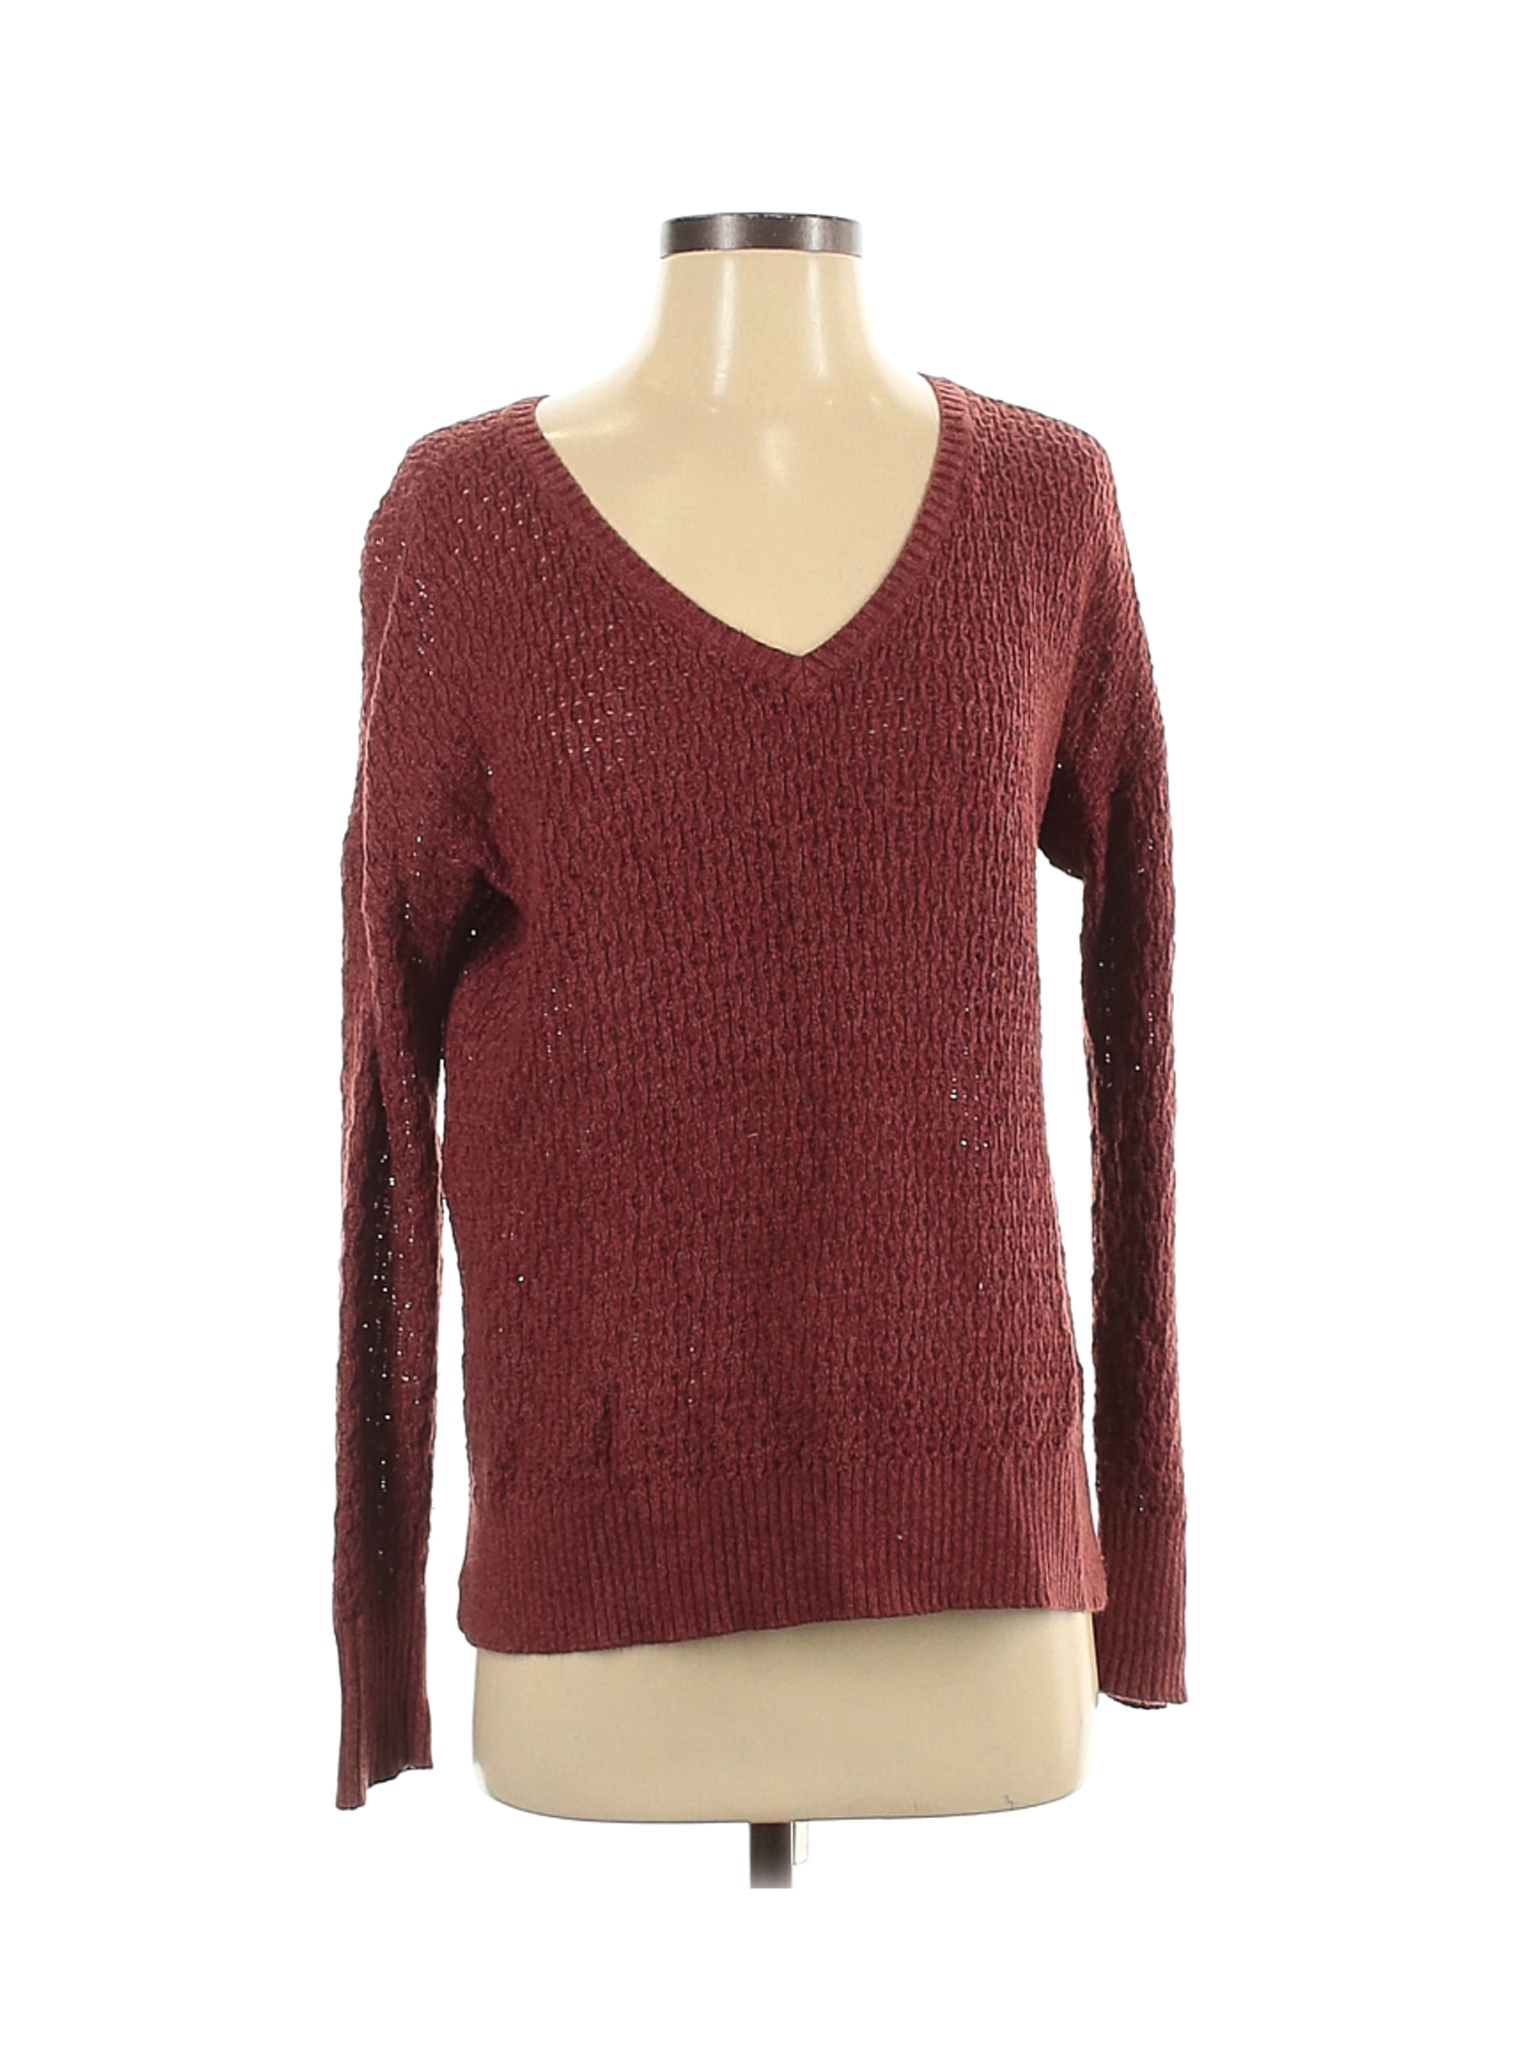 American Eagle Outfitters Women Red Pullover Sweater XS | eBay